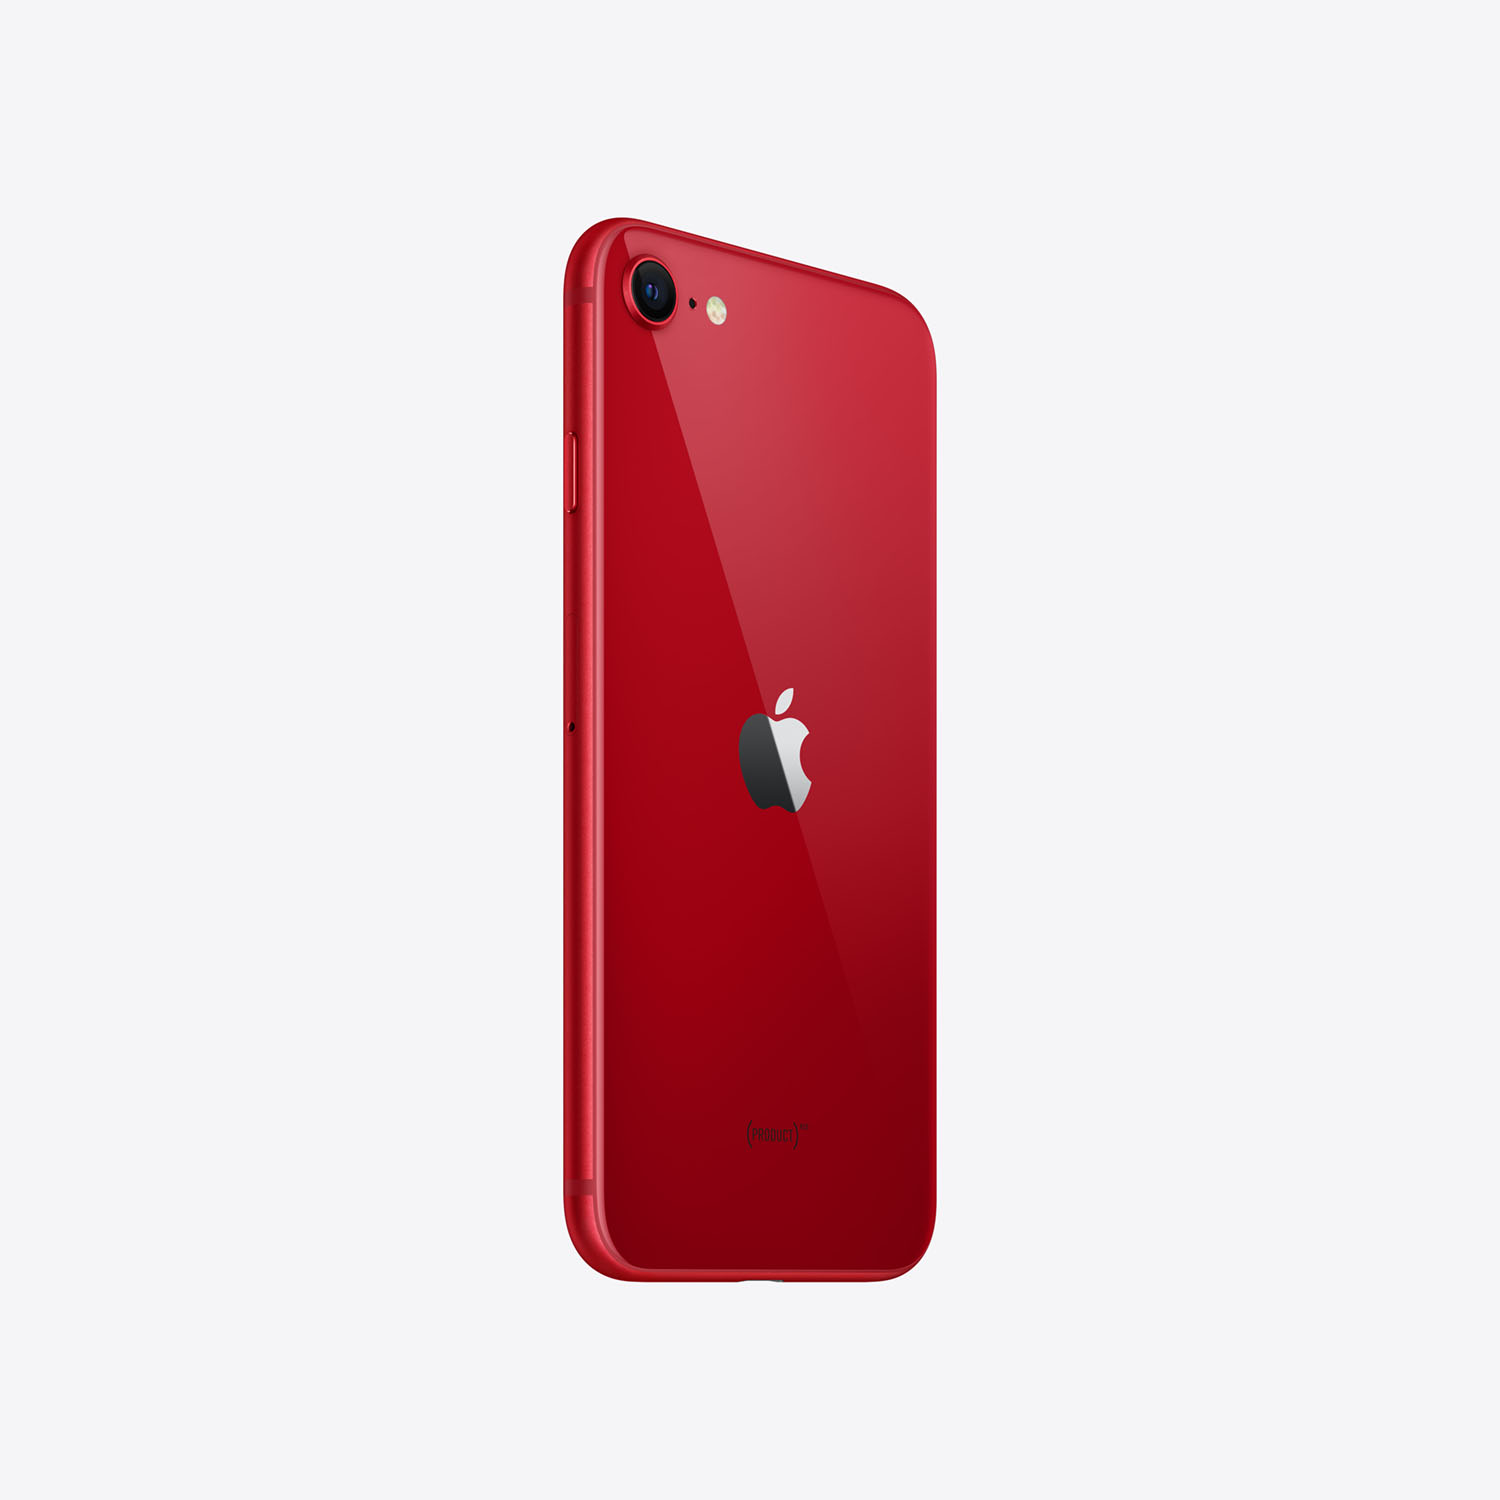 Apple iPhone SE 64GB - (PRODUCT)Red